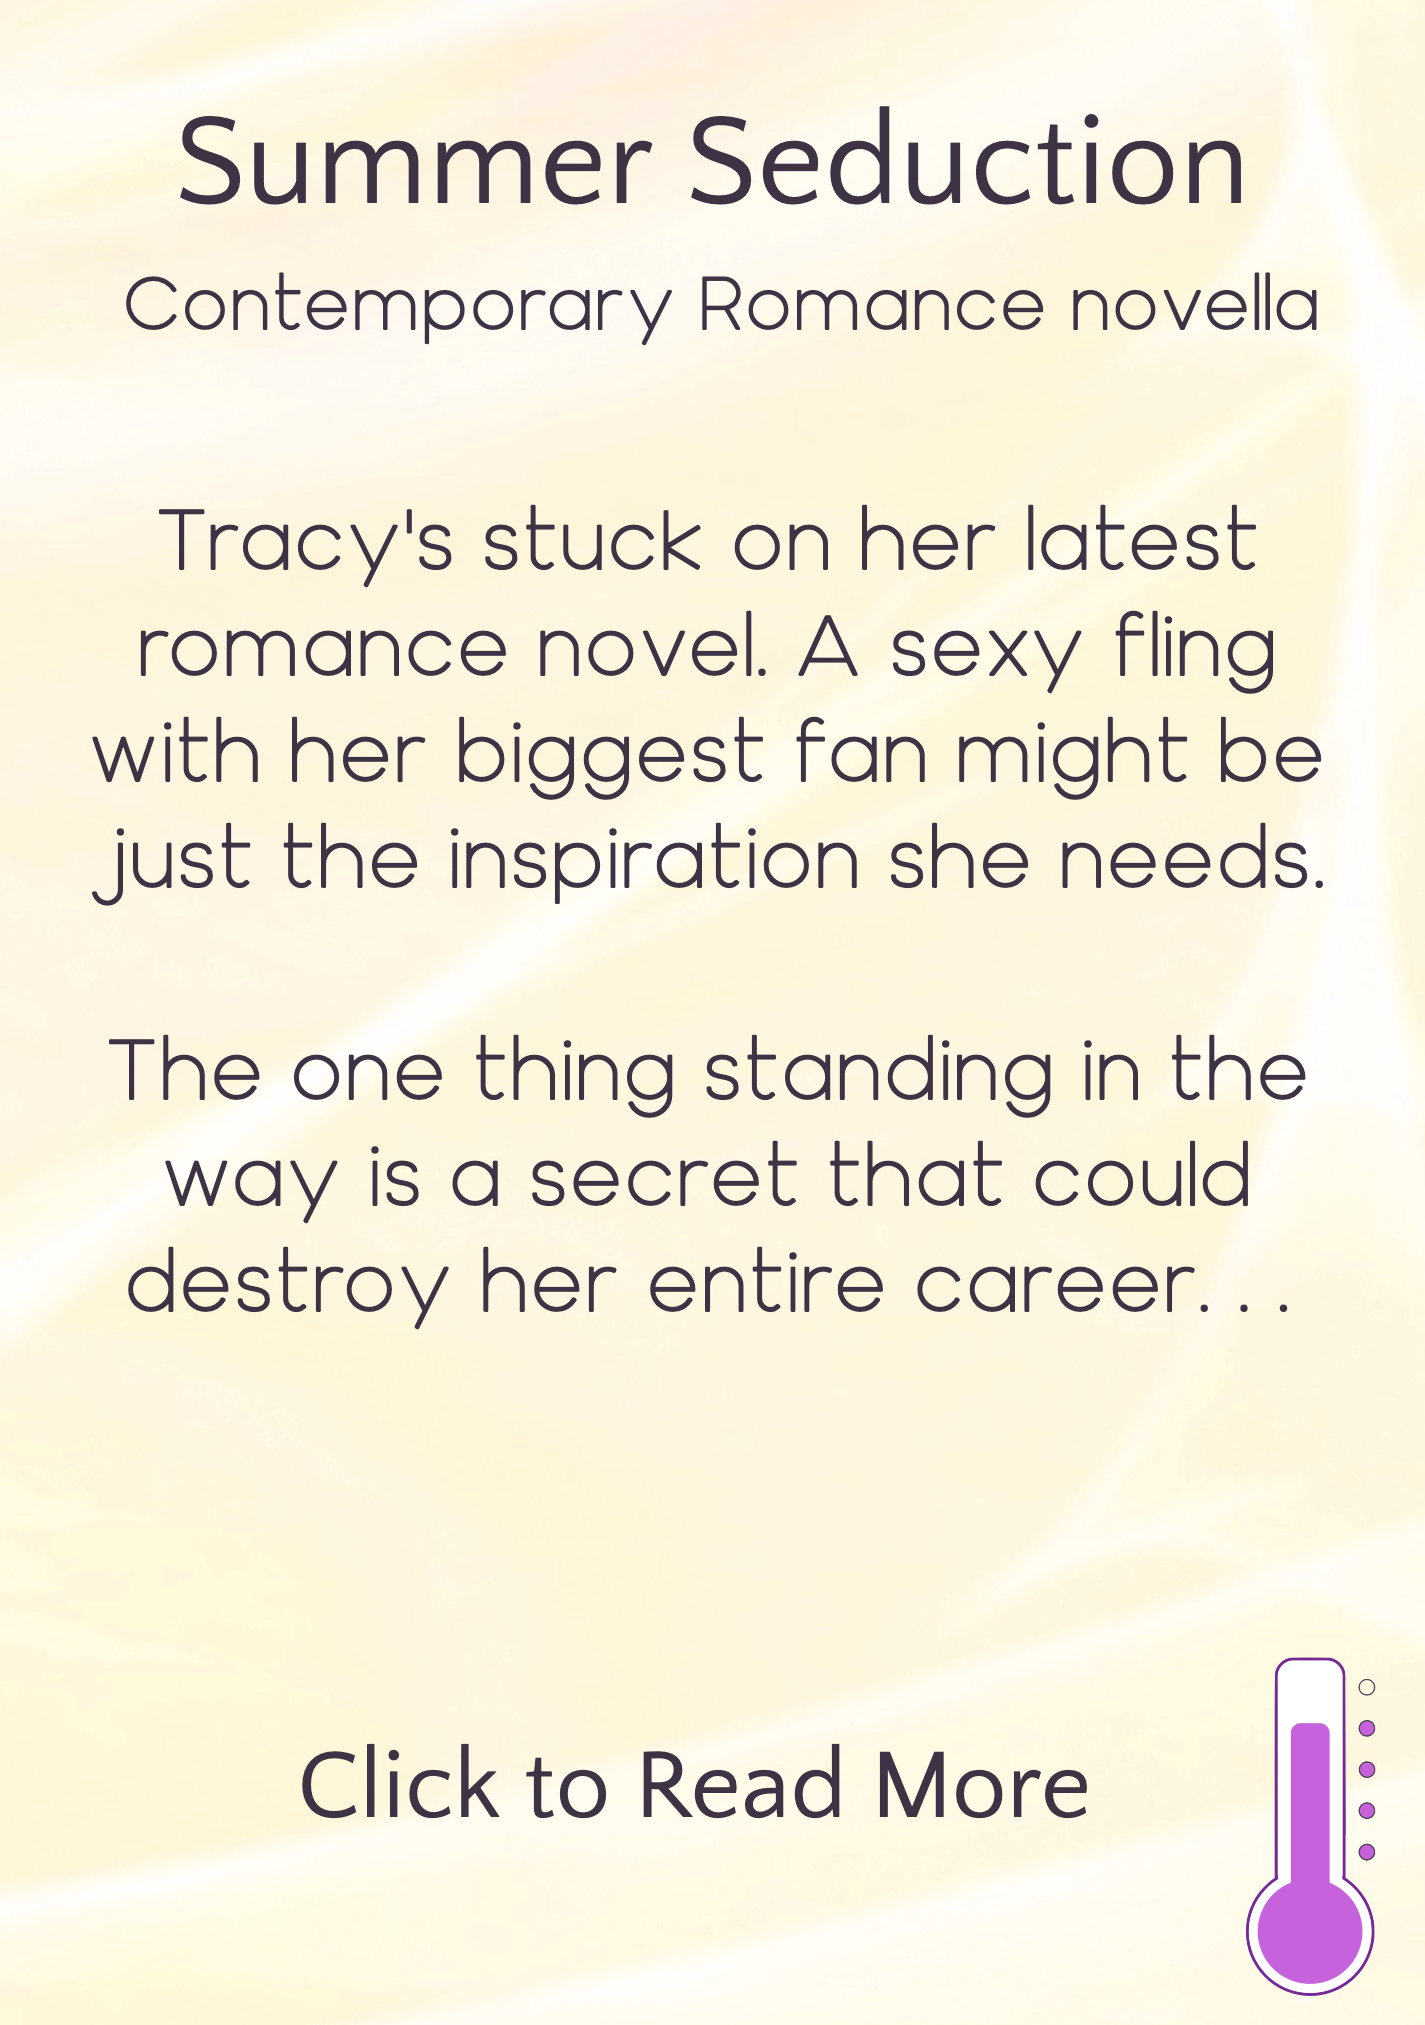 text description appearing on hover, reading: Summer Seduction, Contemporary Romance novella. Tracy's stuck on her latest romance novel. A sexy fling with her biggest fan might be just the inspiration she needs. The one thing standing in the way is a secret that could destroy her entire career. Click to read more. Icon in bottom right indicating heat level is "sizzling"